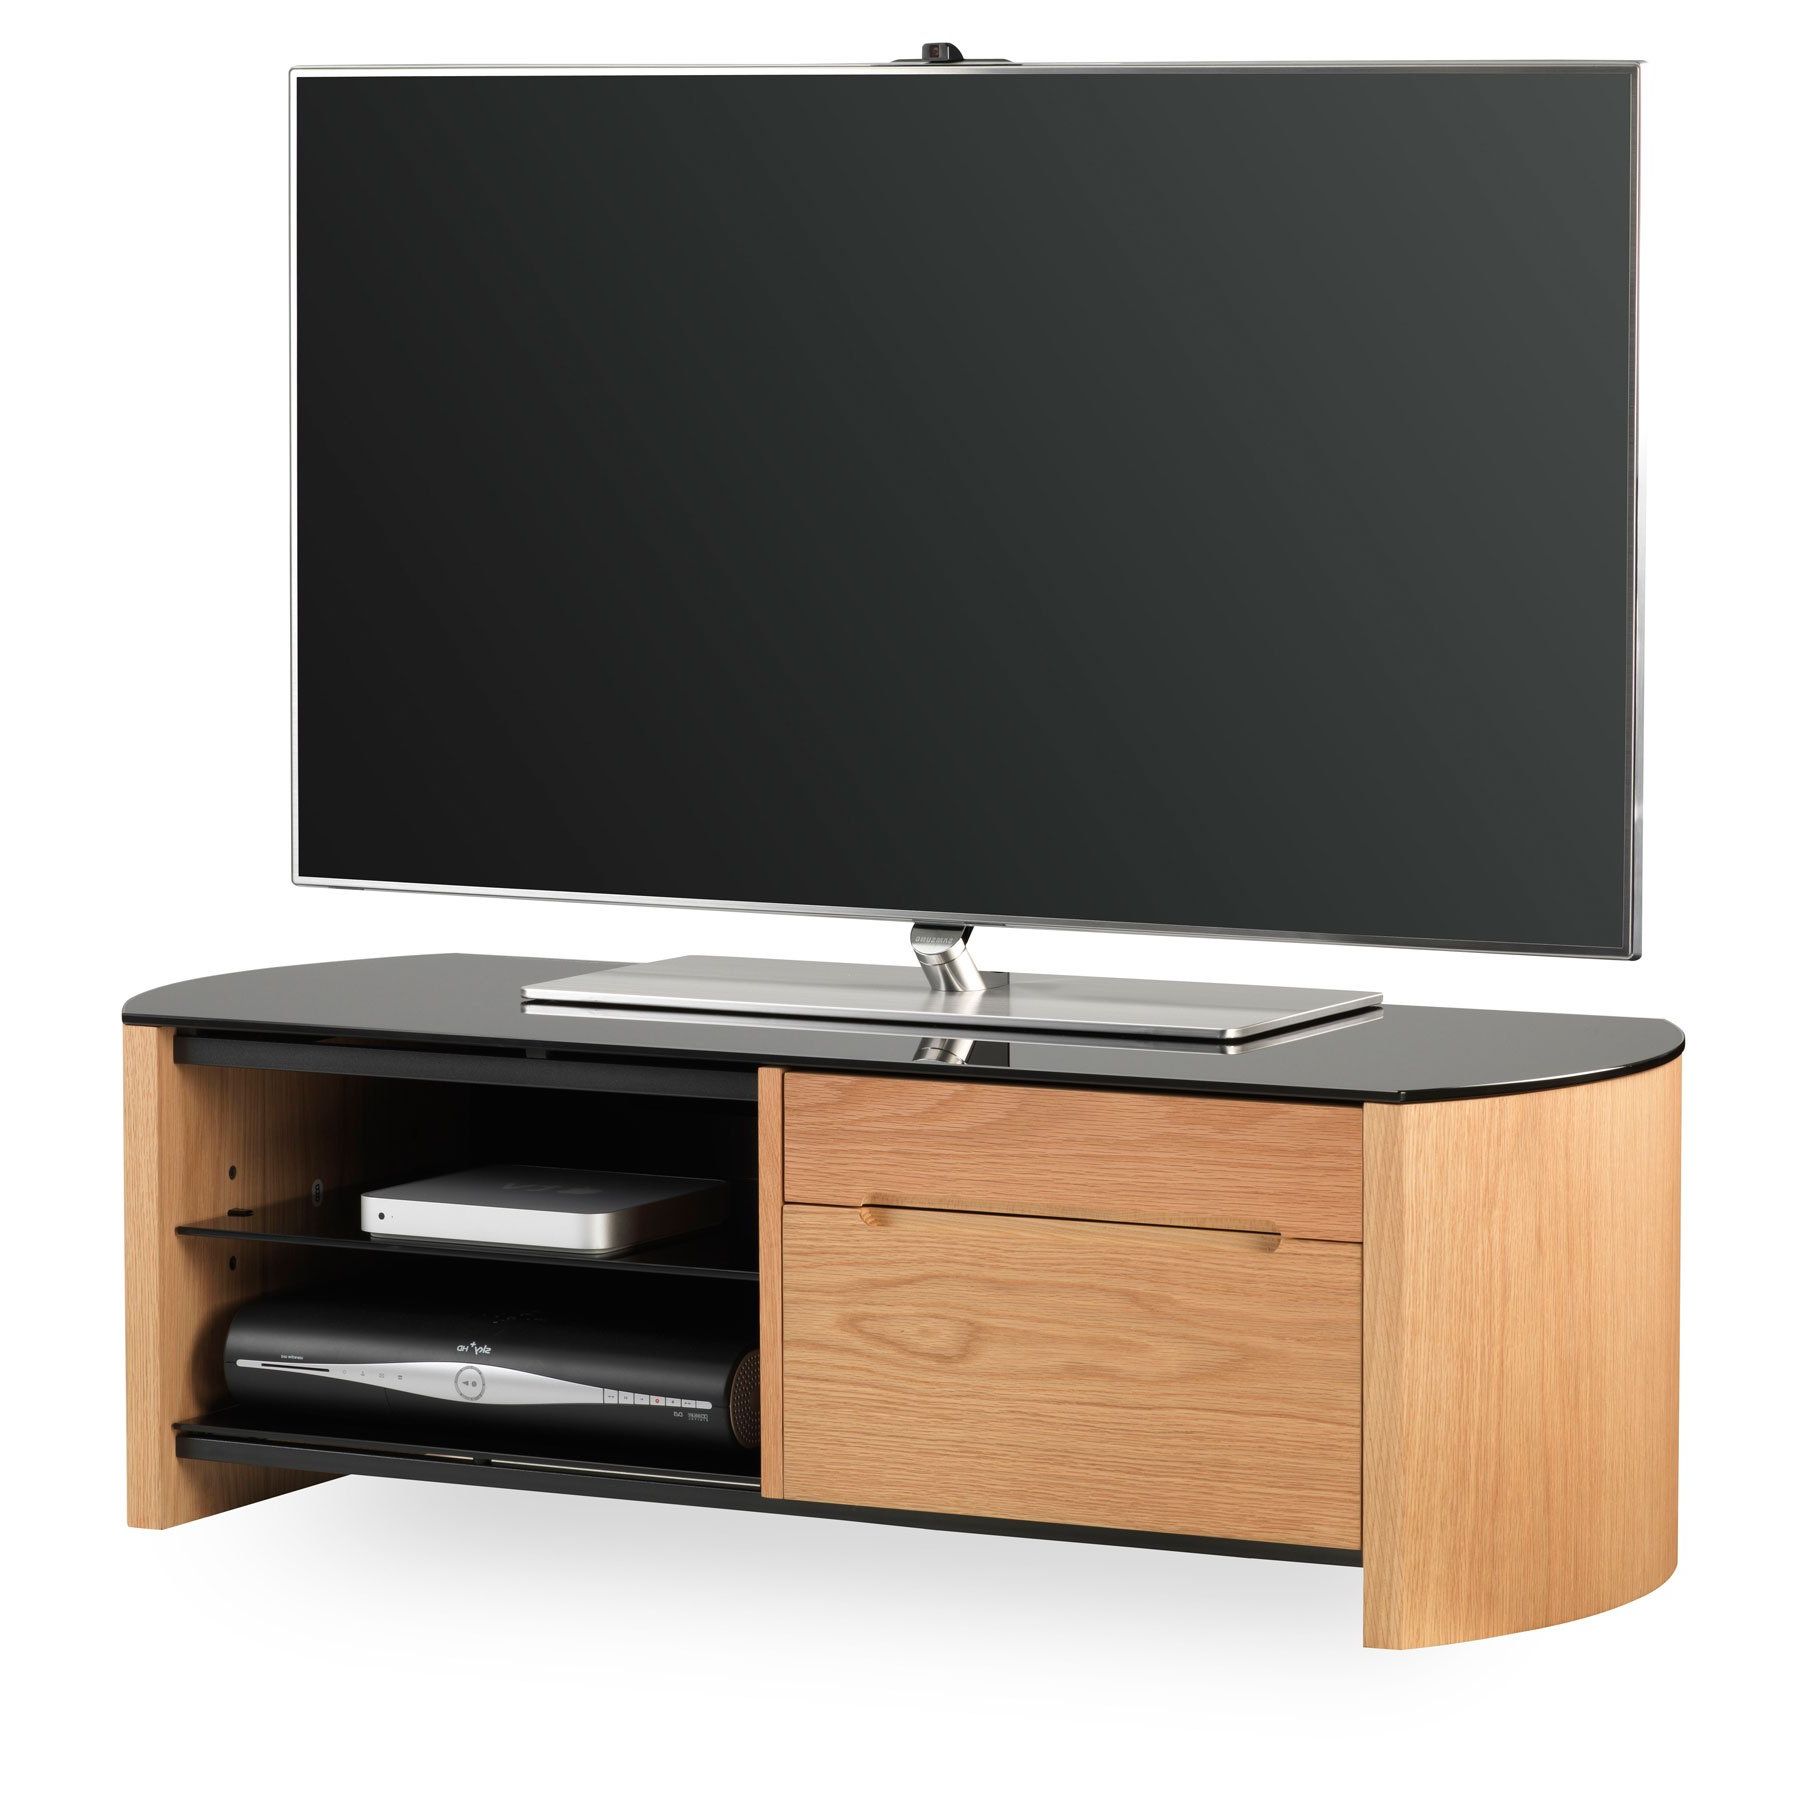 Alphason Finewood Fw1100cb Light Oak Tv Stand For Up To 50 Throughout Fashionable Tv Stands For Tvs Up To 50" (View 8 of 25)